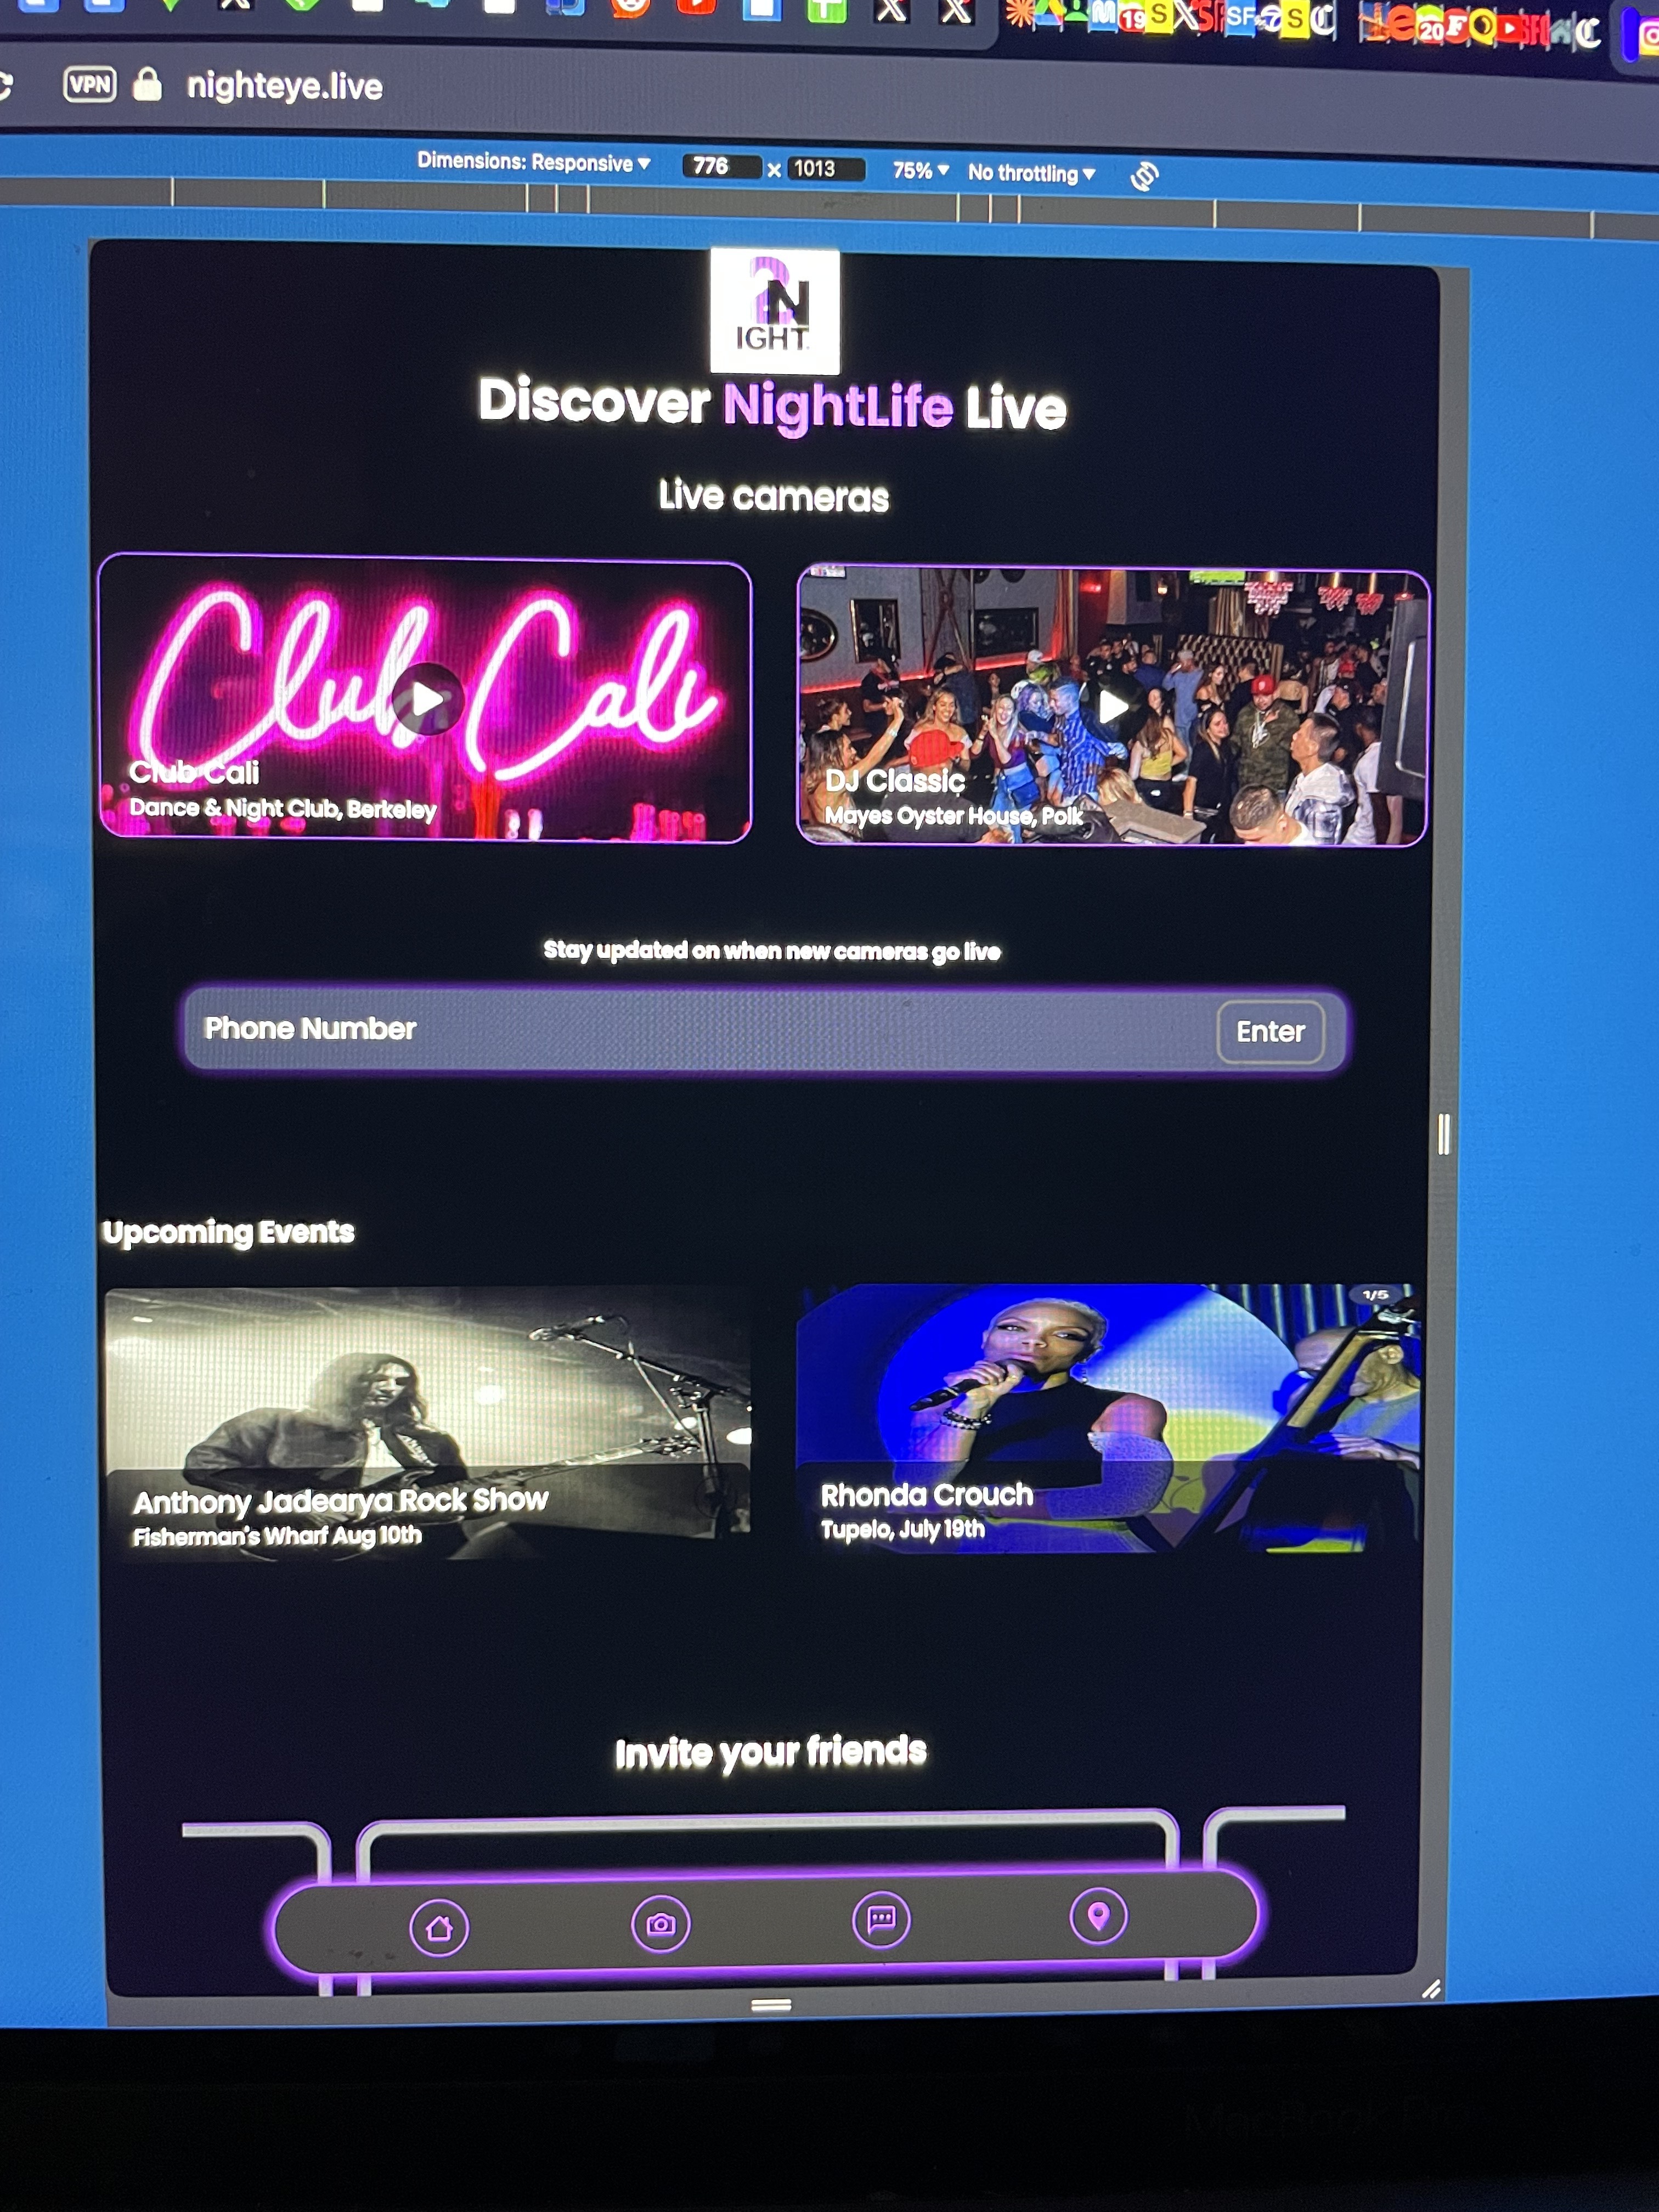 A webpage titled &quot;Discover NightLife Live&quot; features live cameras from &quot;Club Cali&quot; and &quot;DJ Classic.&quot; Upcoming events include Anthony Jadeanya's Rock Show and Rhonda Crouch's concert.